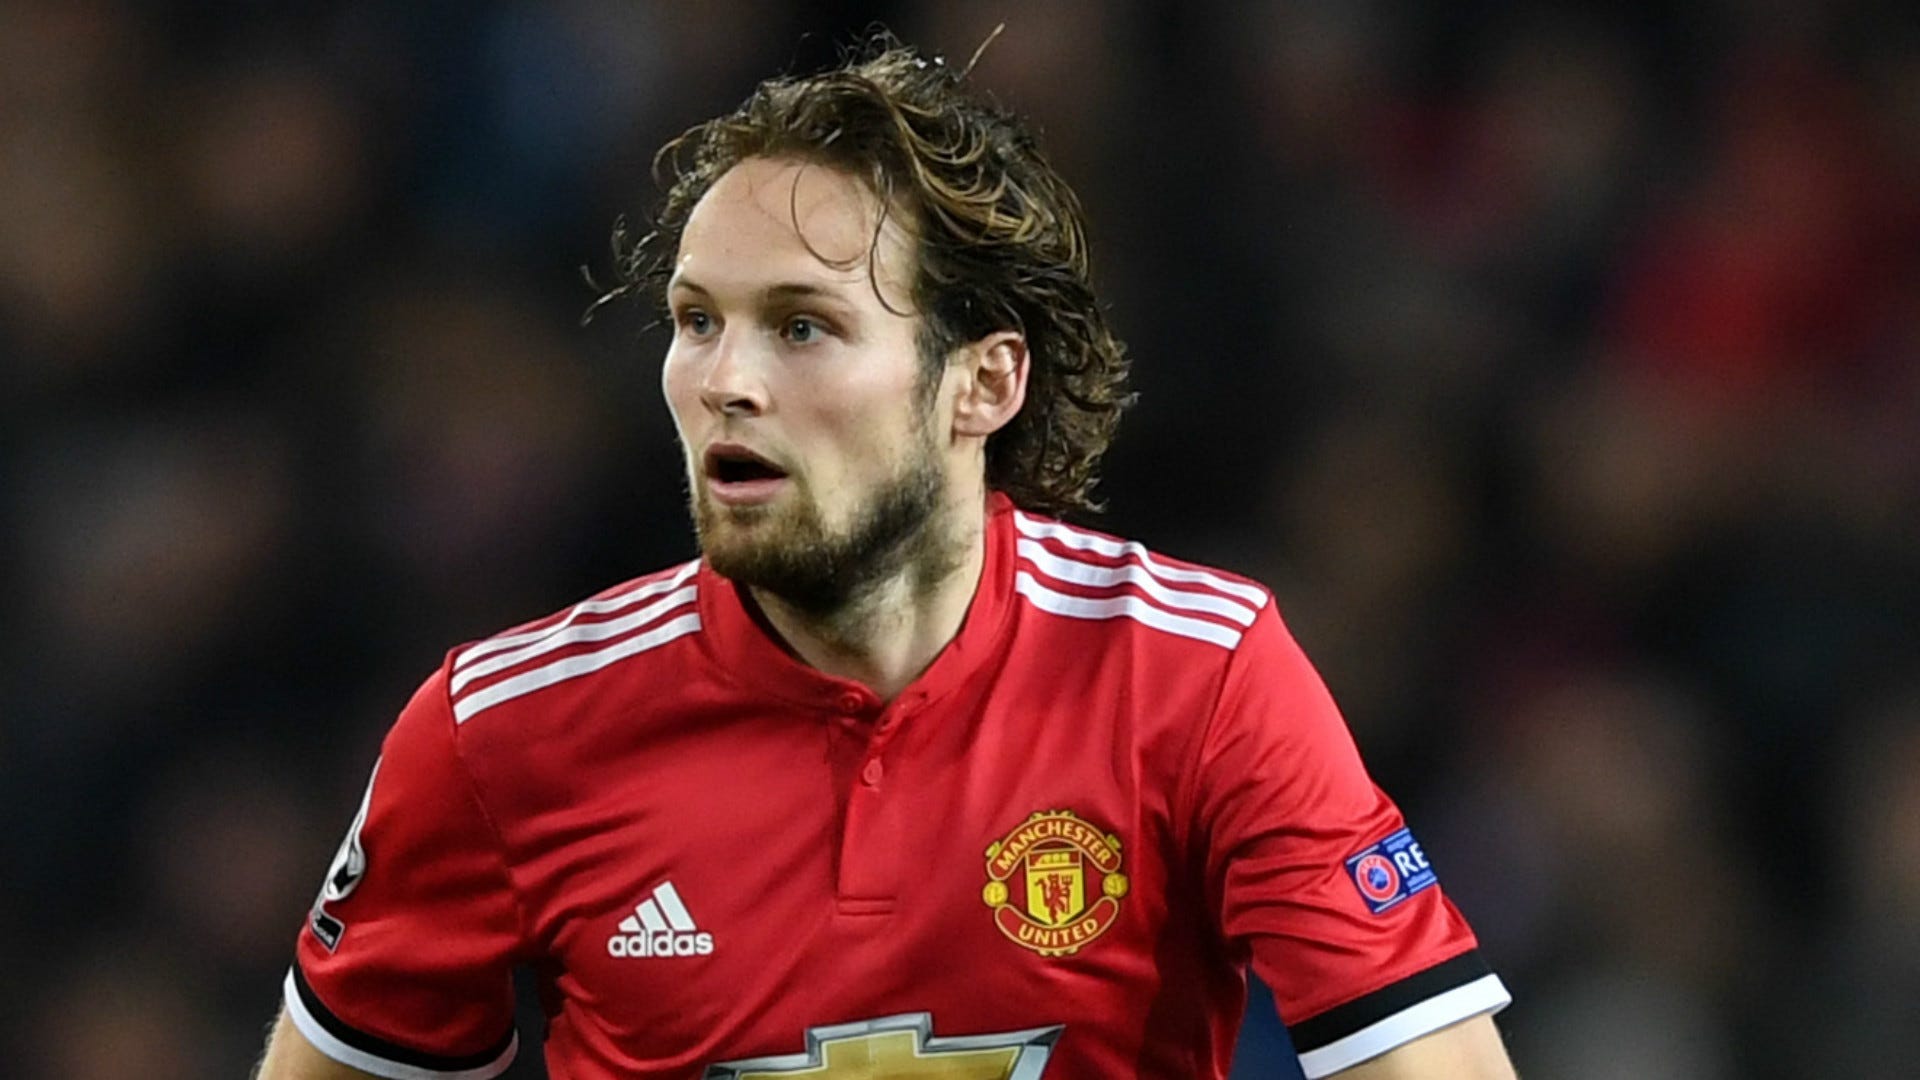 Manchester United transfer news: Daley Blind £14m fee agreed with Ajax as defender nears exit | Goal.com United Arab Emirates